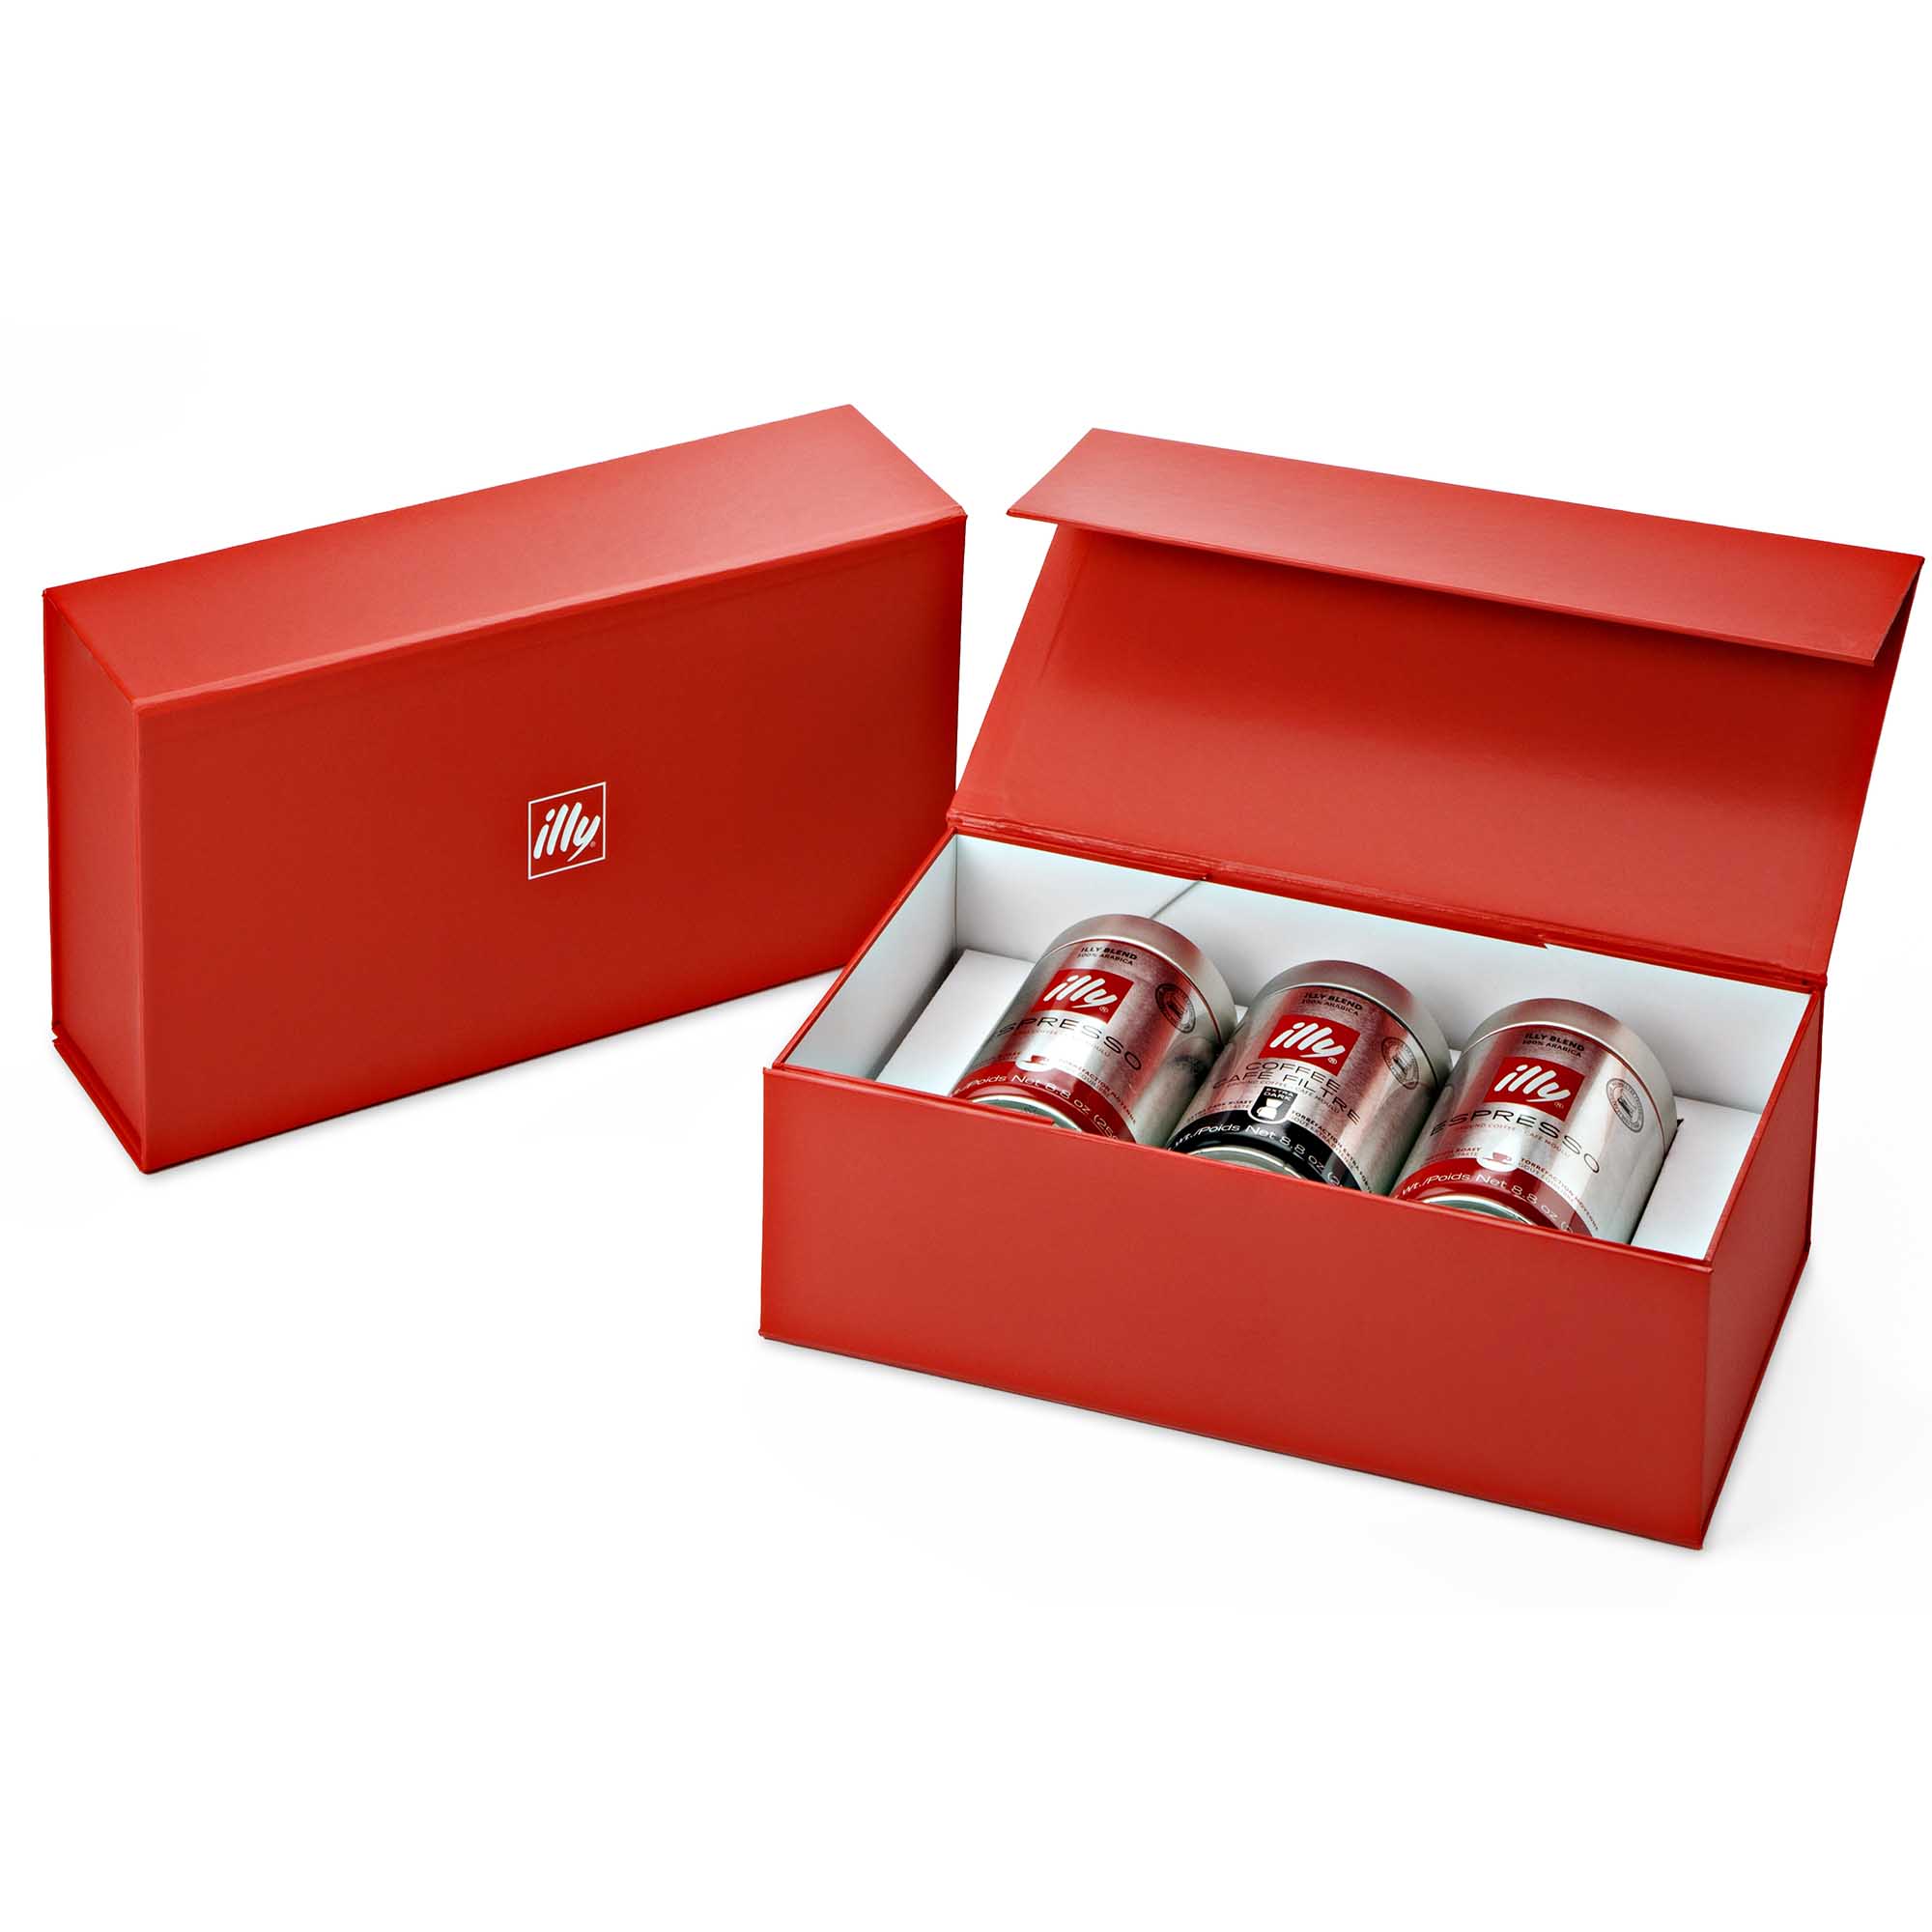 Customize a Gift Box of 3 illy Cans of Coffee